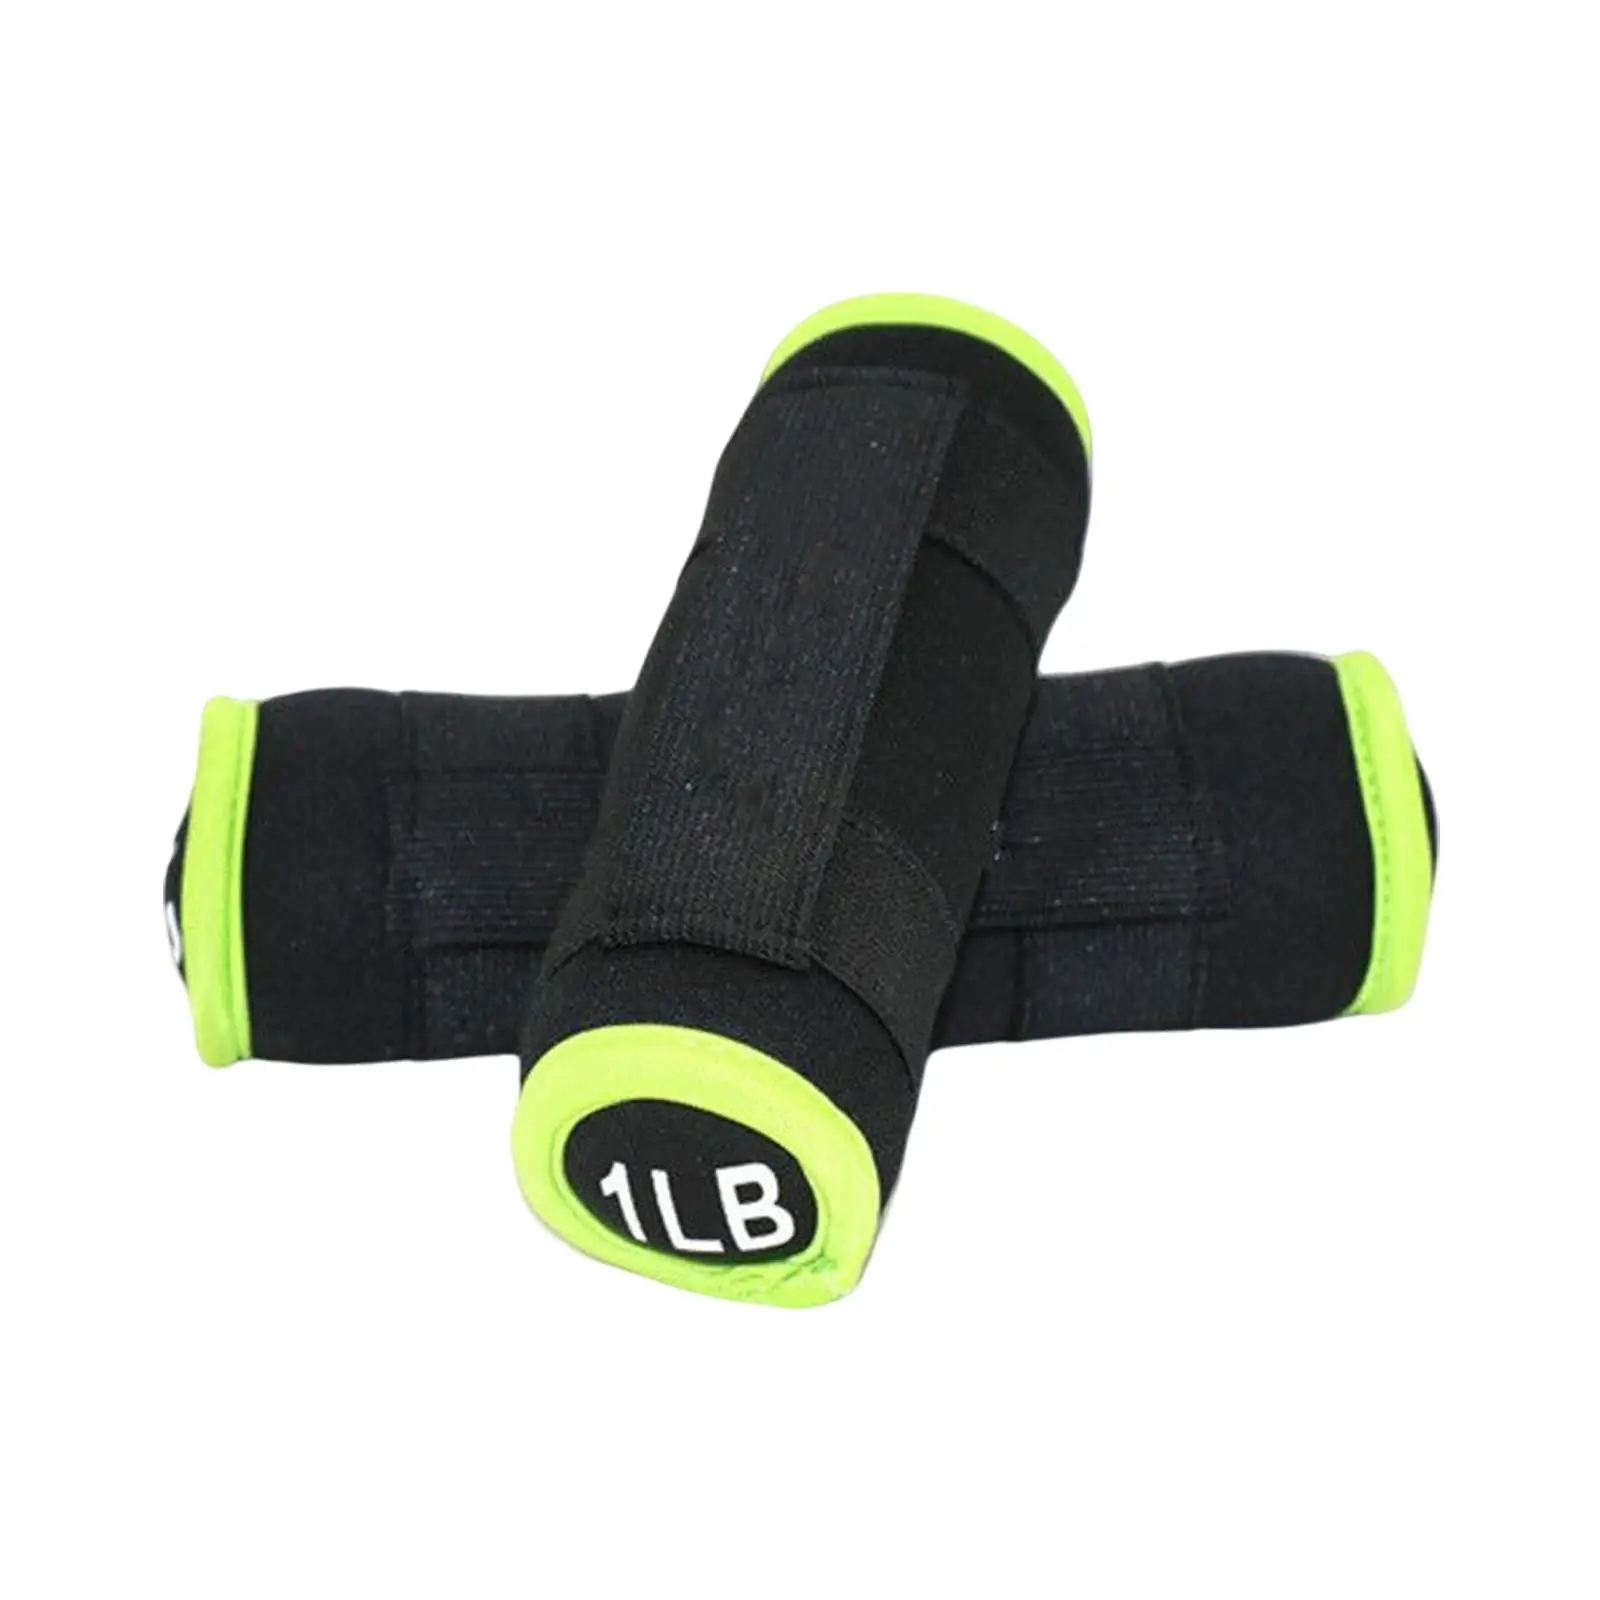 Hand Weights Set Weightlifting Walking Dumbbell with Hand Strap for Dance